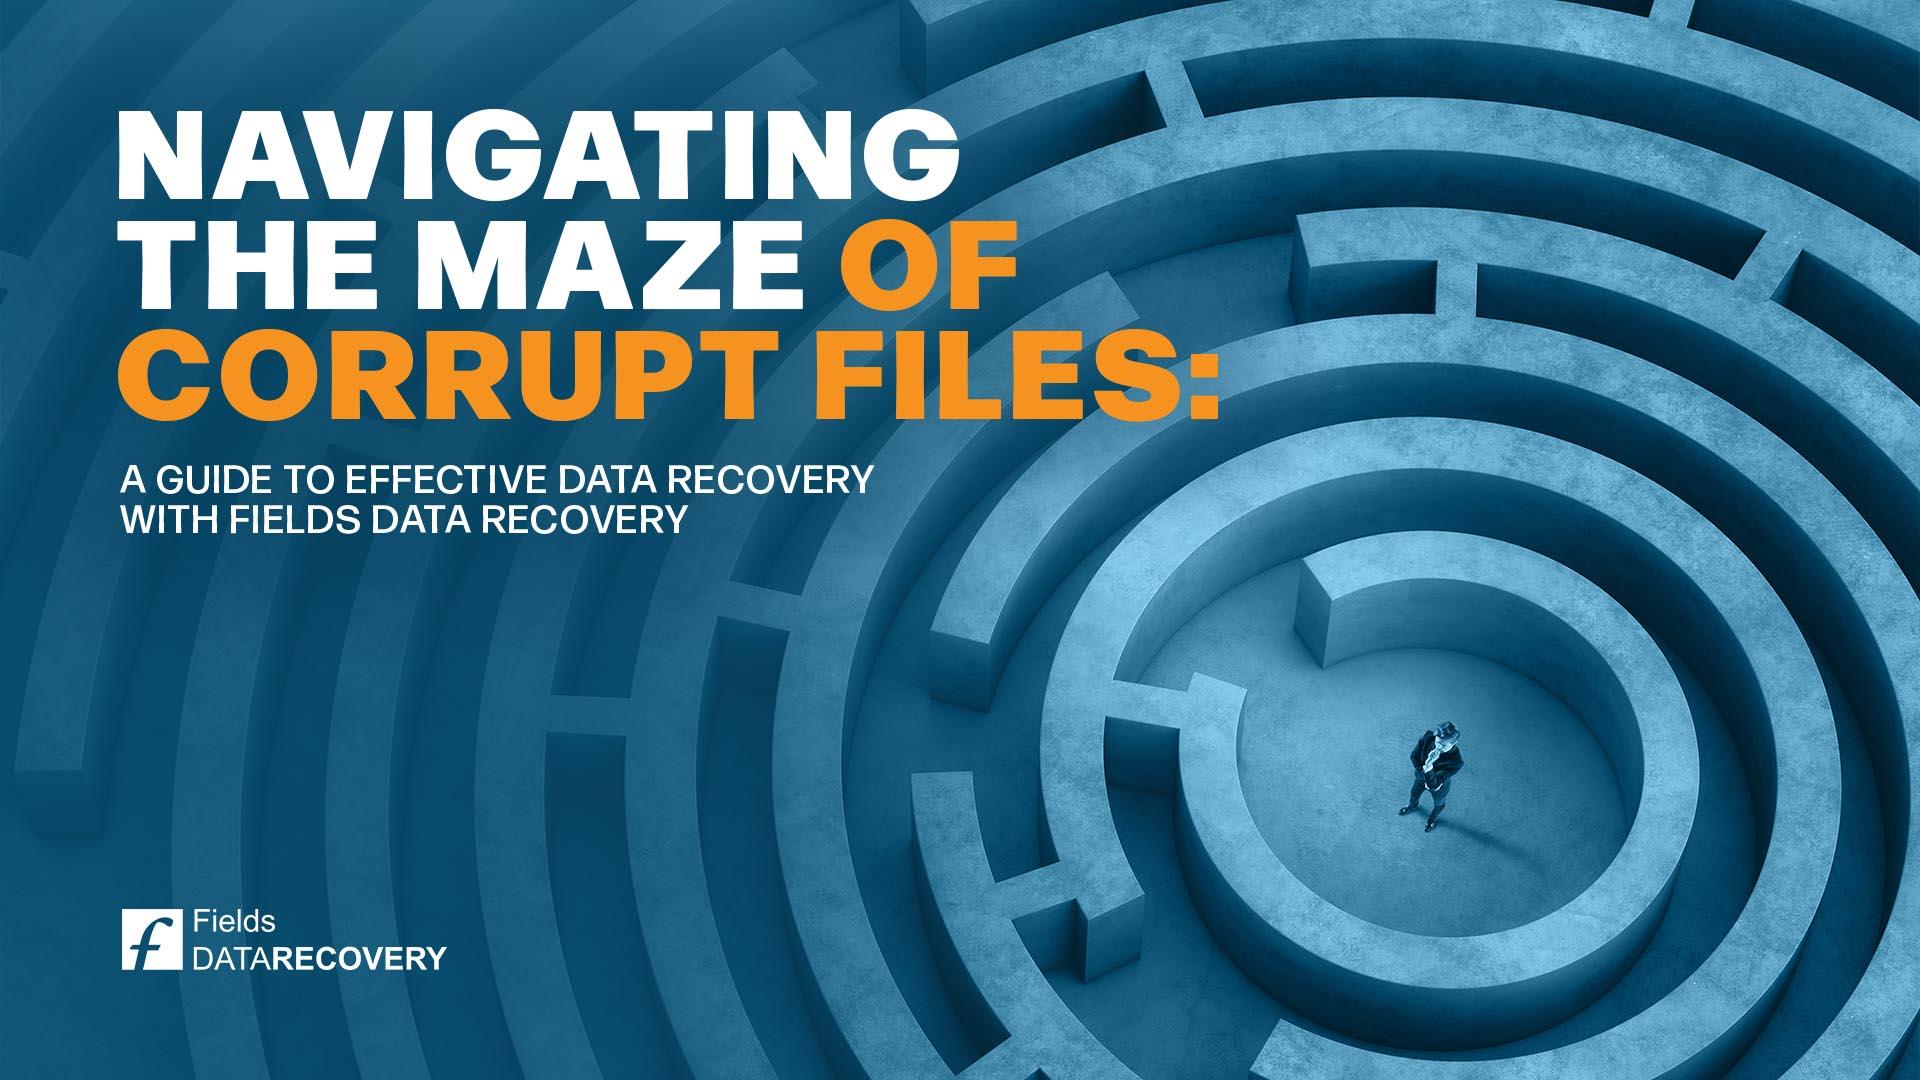 Navigating the Maze of Corrupt Files: A Guide to Effective Data Recovery with Fields Data Recovery